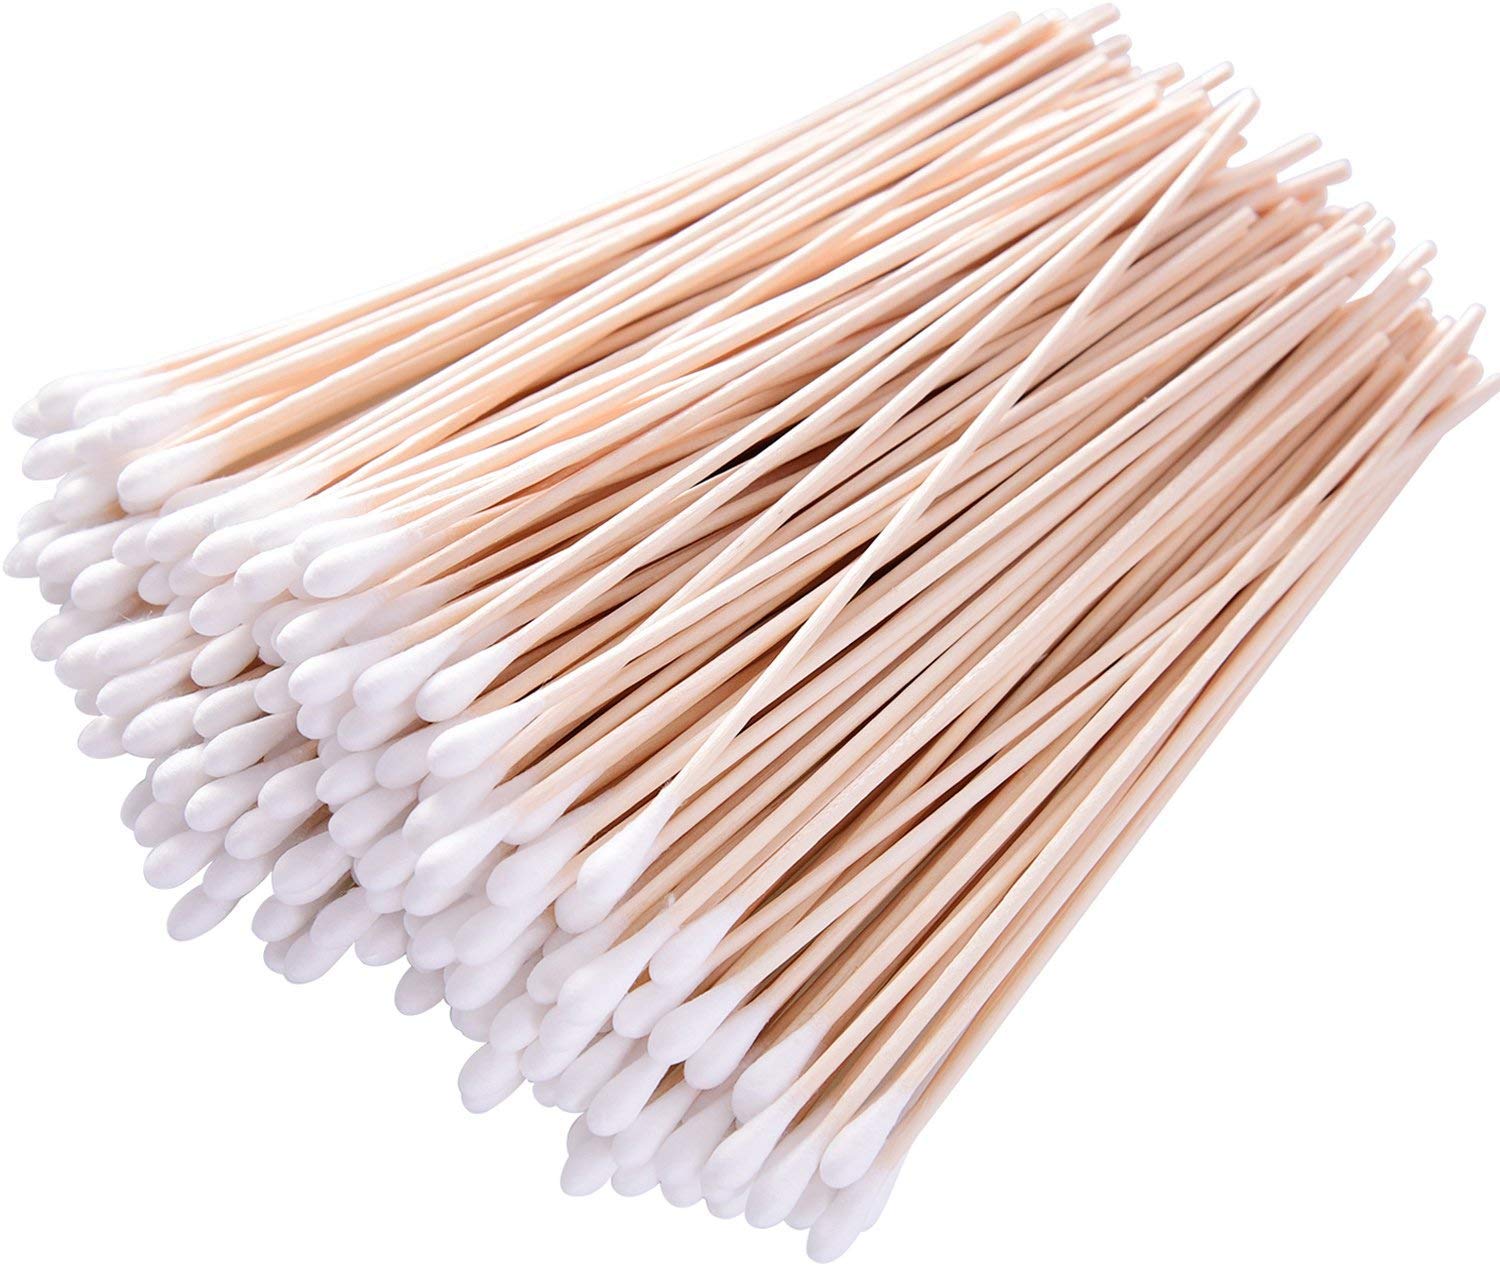 6 Long Cotton Swabs 400pcs for Makeup, Gun Cleaning or Pets Care 6 Inch  (Round Tips 400)